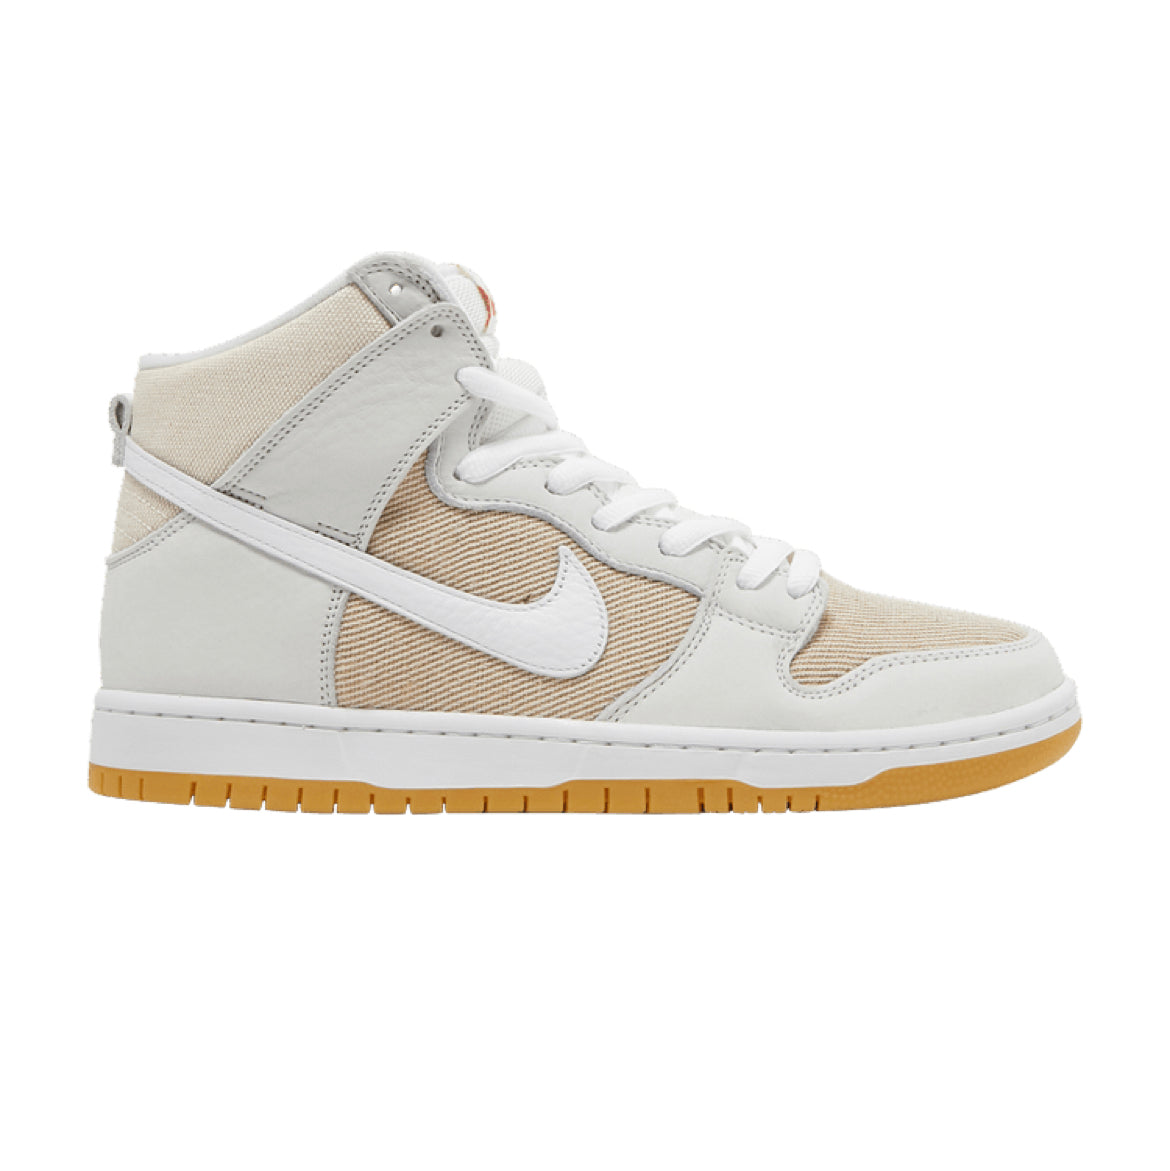 Nike Dunk High "Unbleached Natural"